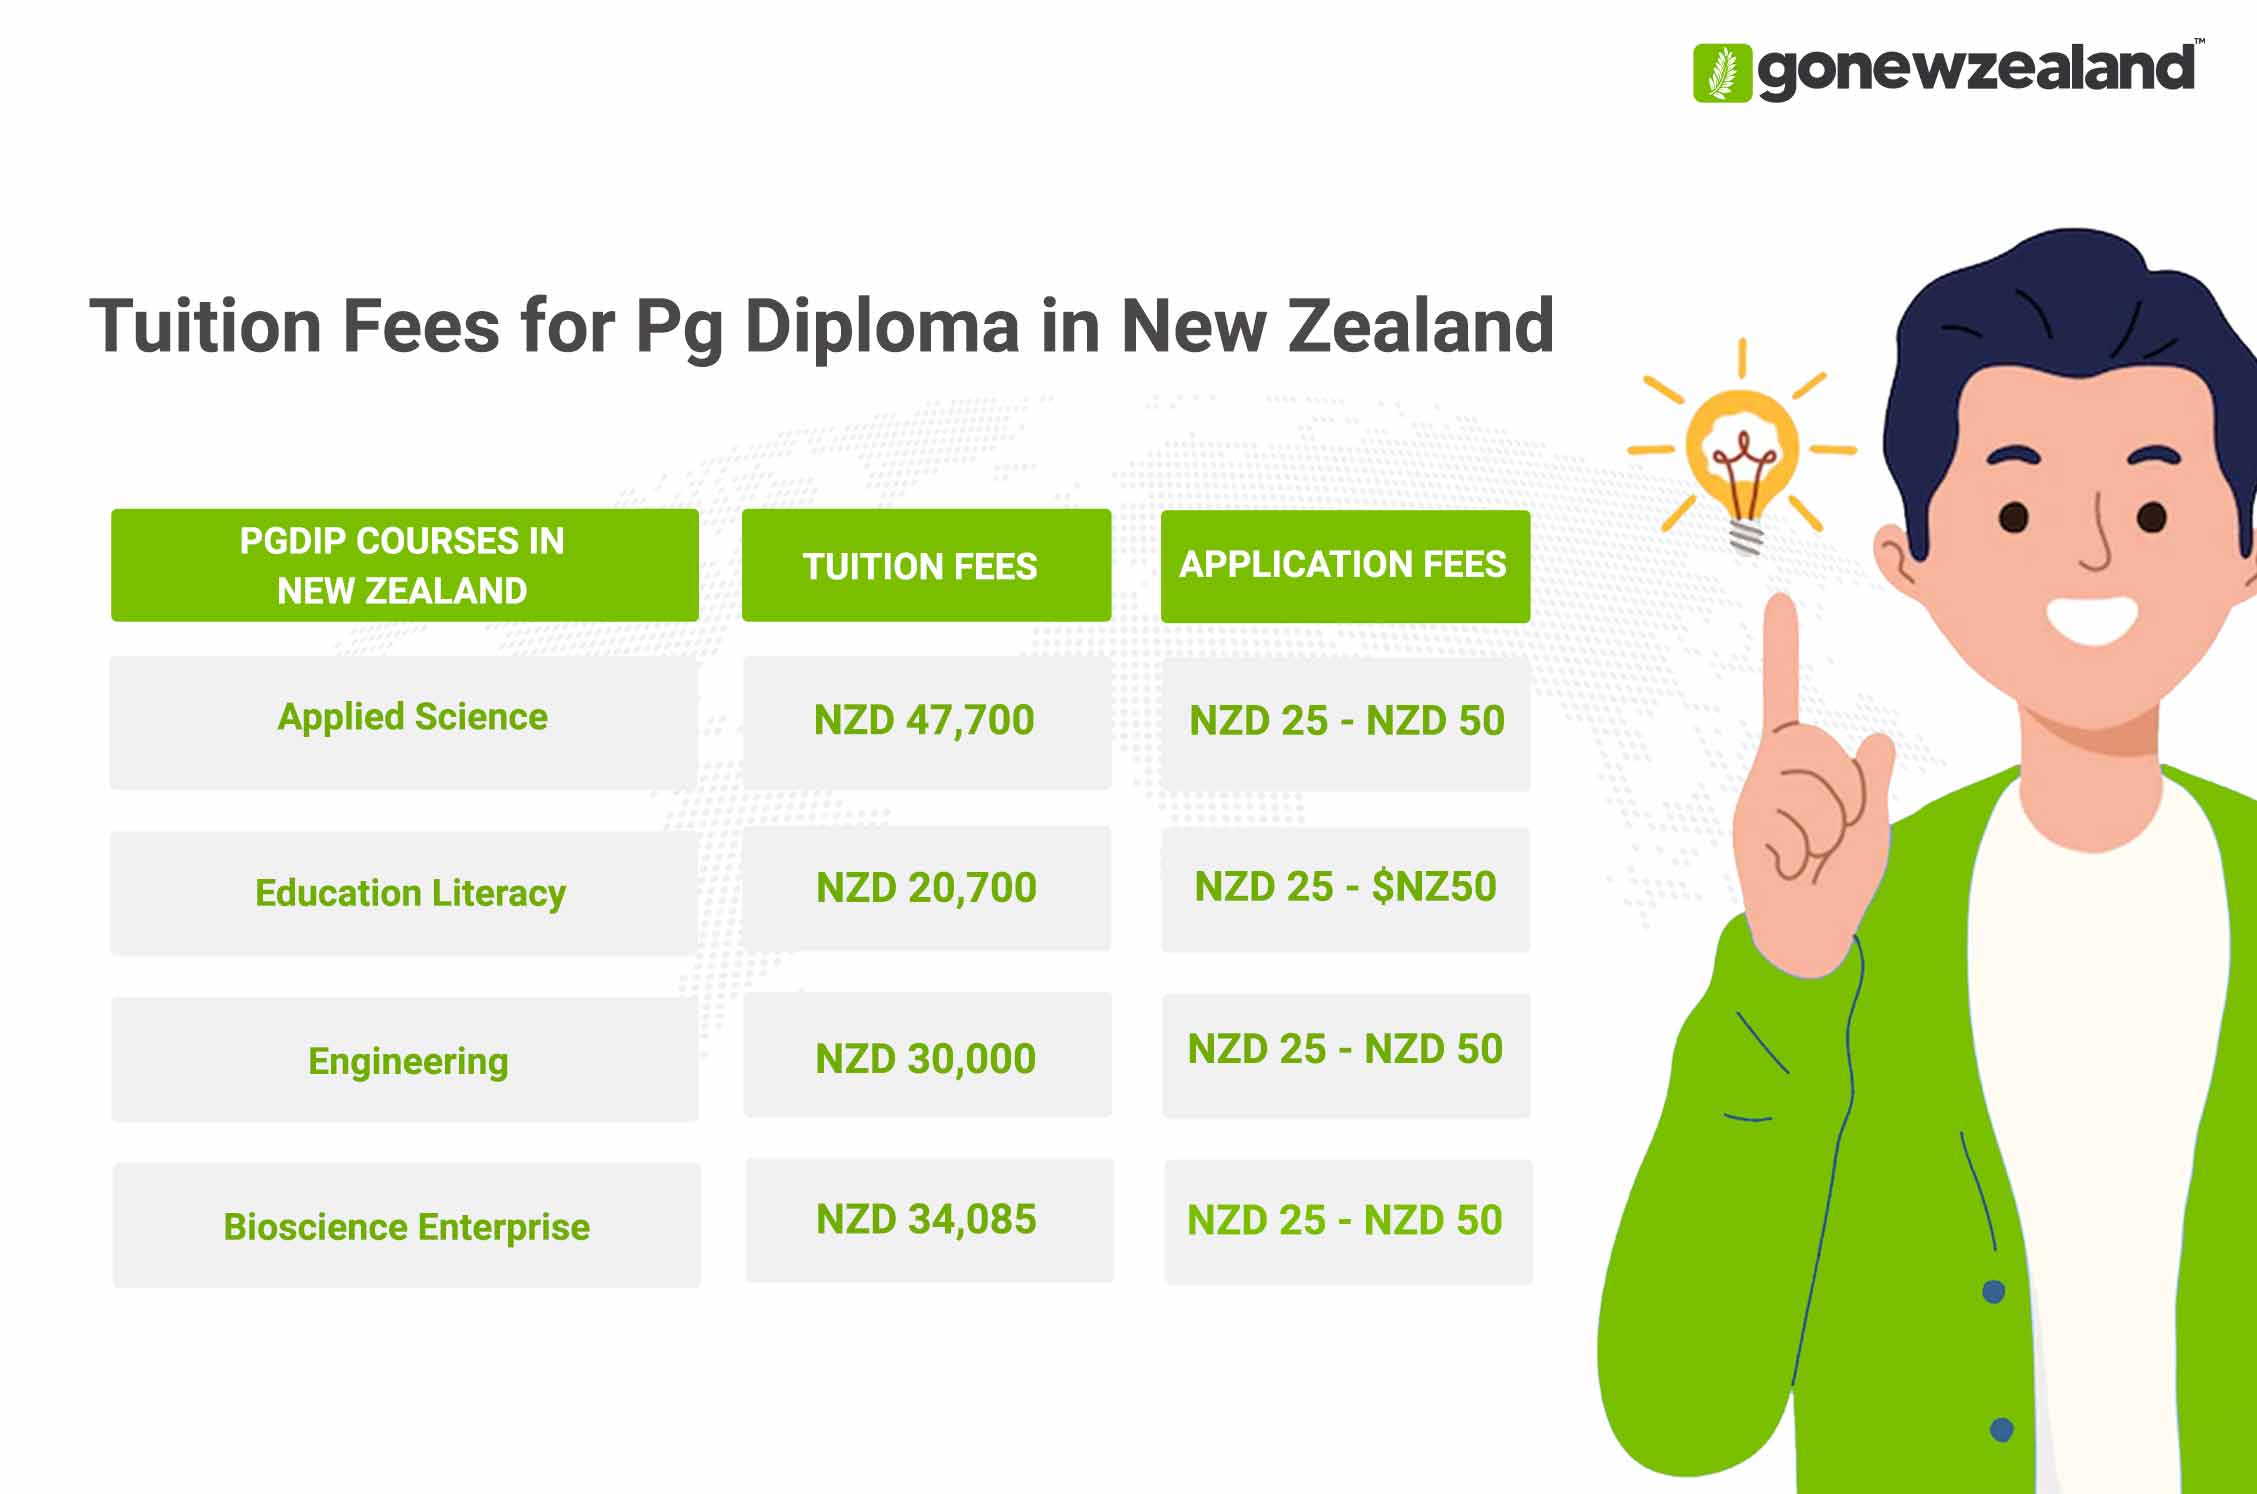 Postgraduate Diploma in New Zealand Tuition Fees